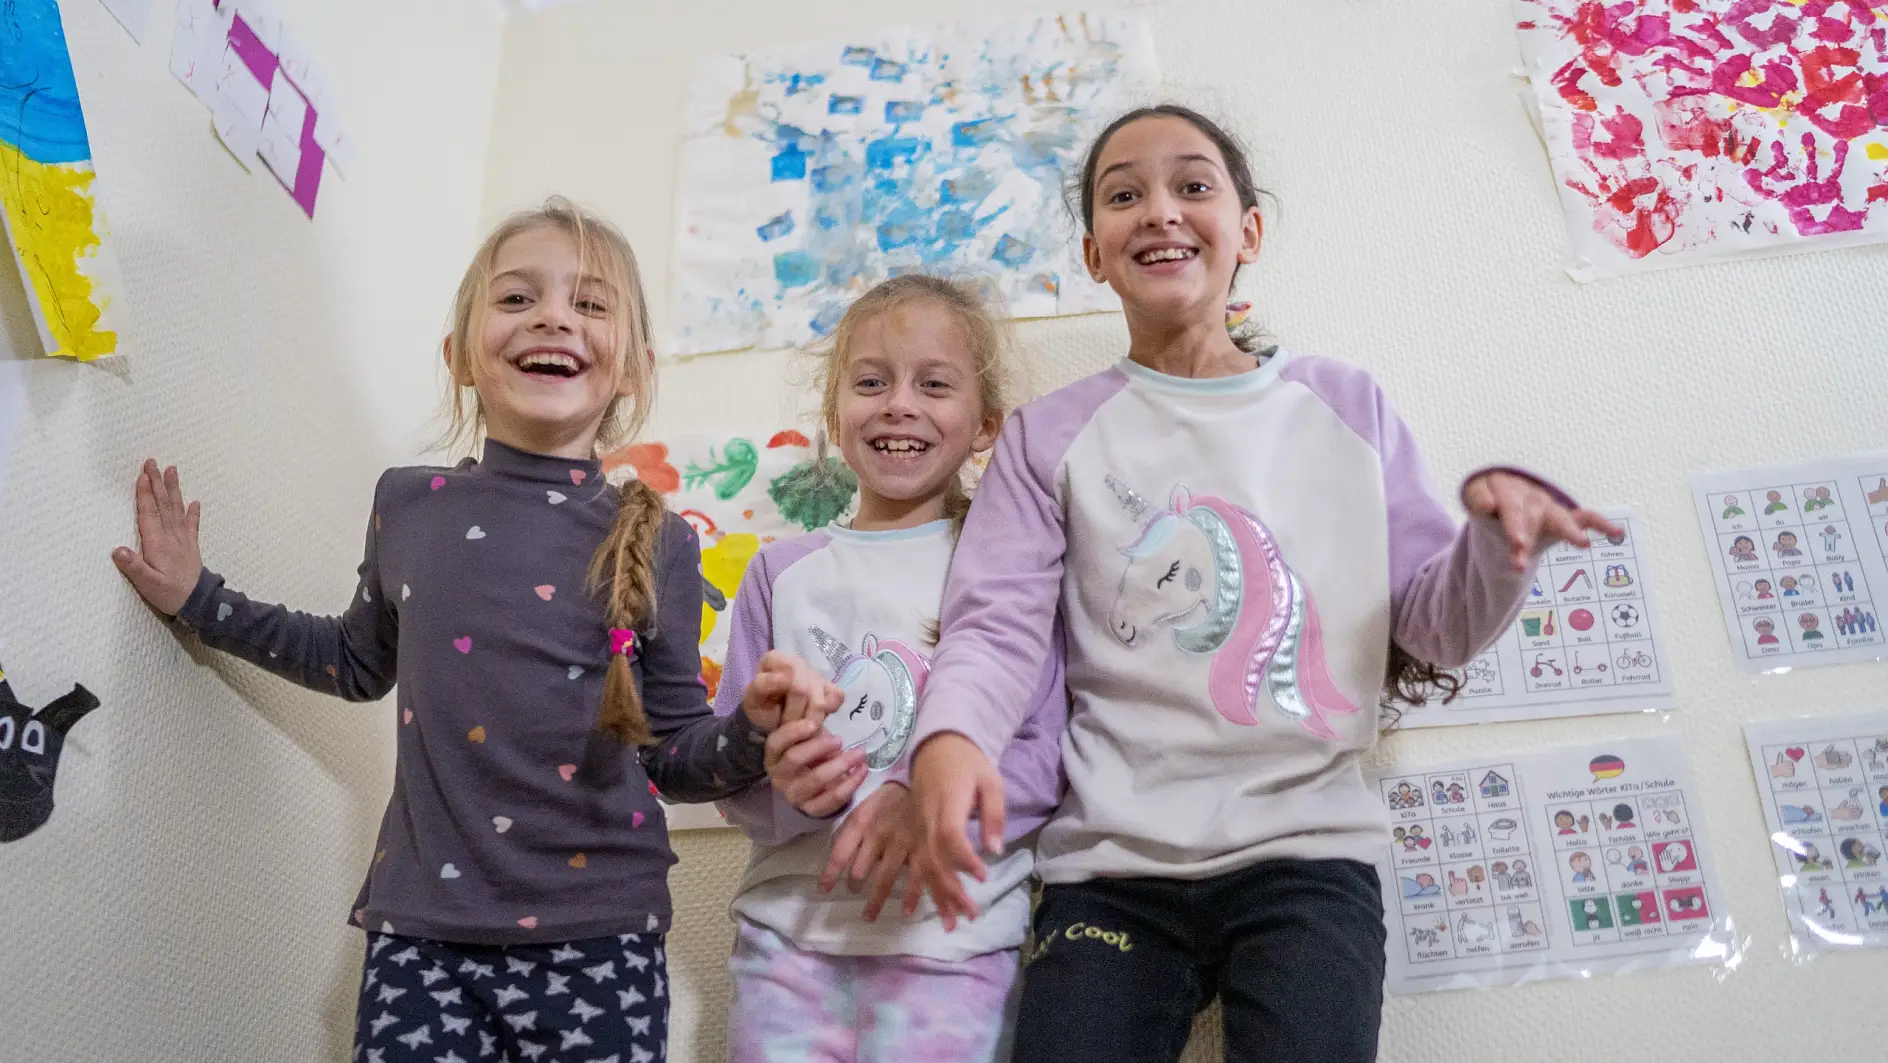 (From left to right) Larissa*, 7, Svitlana*, 7 and Daniela*, 11 smile at the camera in the Child Friendly Space located in a temporary shelter for Ukrainian refugees in Frankfurt, Germany.